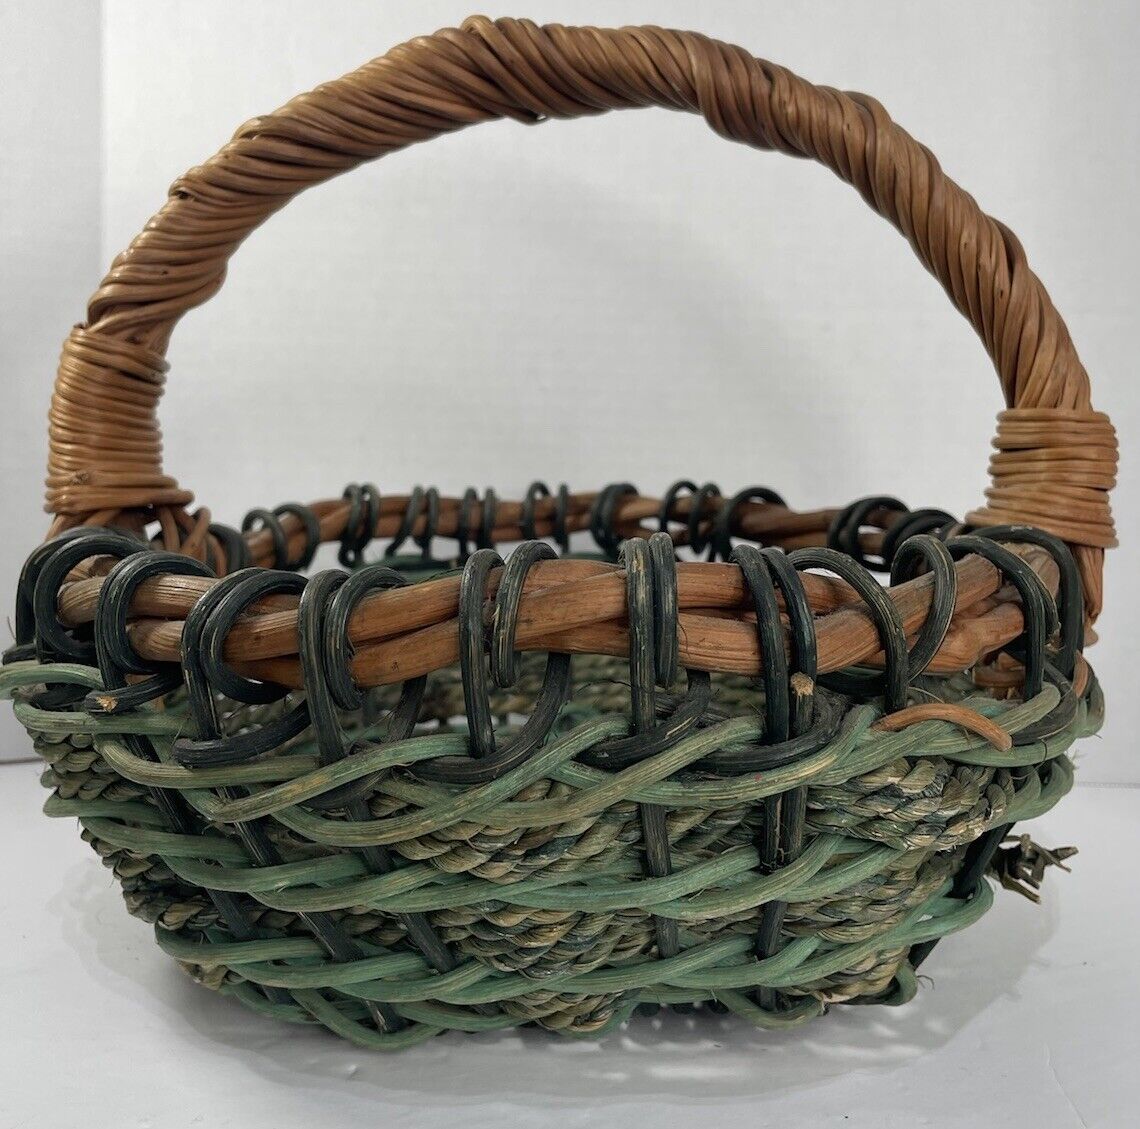 Vtg Hand Woven Braided Wicker Gathering Market Basket Farm Country Rustic 12”